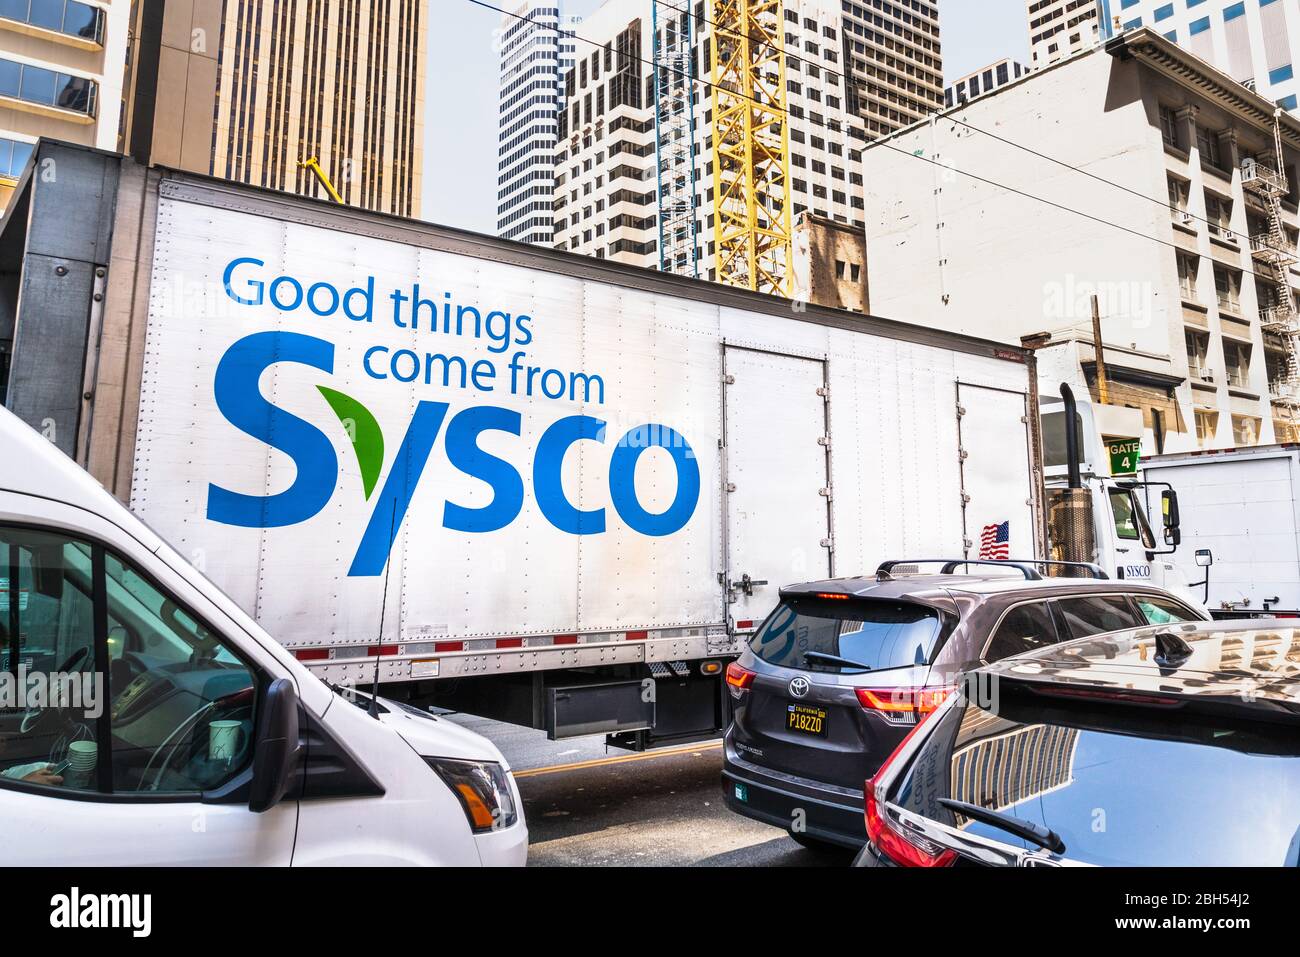 Aug 21, 2019 San Francisco / CA / USA - Sysco truck driving on a street; Sysco Corporation is an American multinational distributor of food and relate Stock Photo